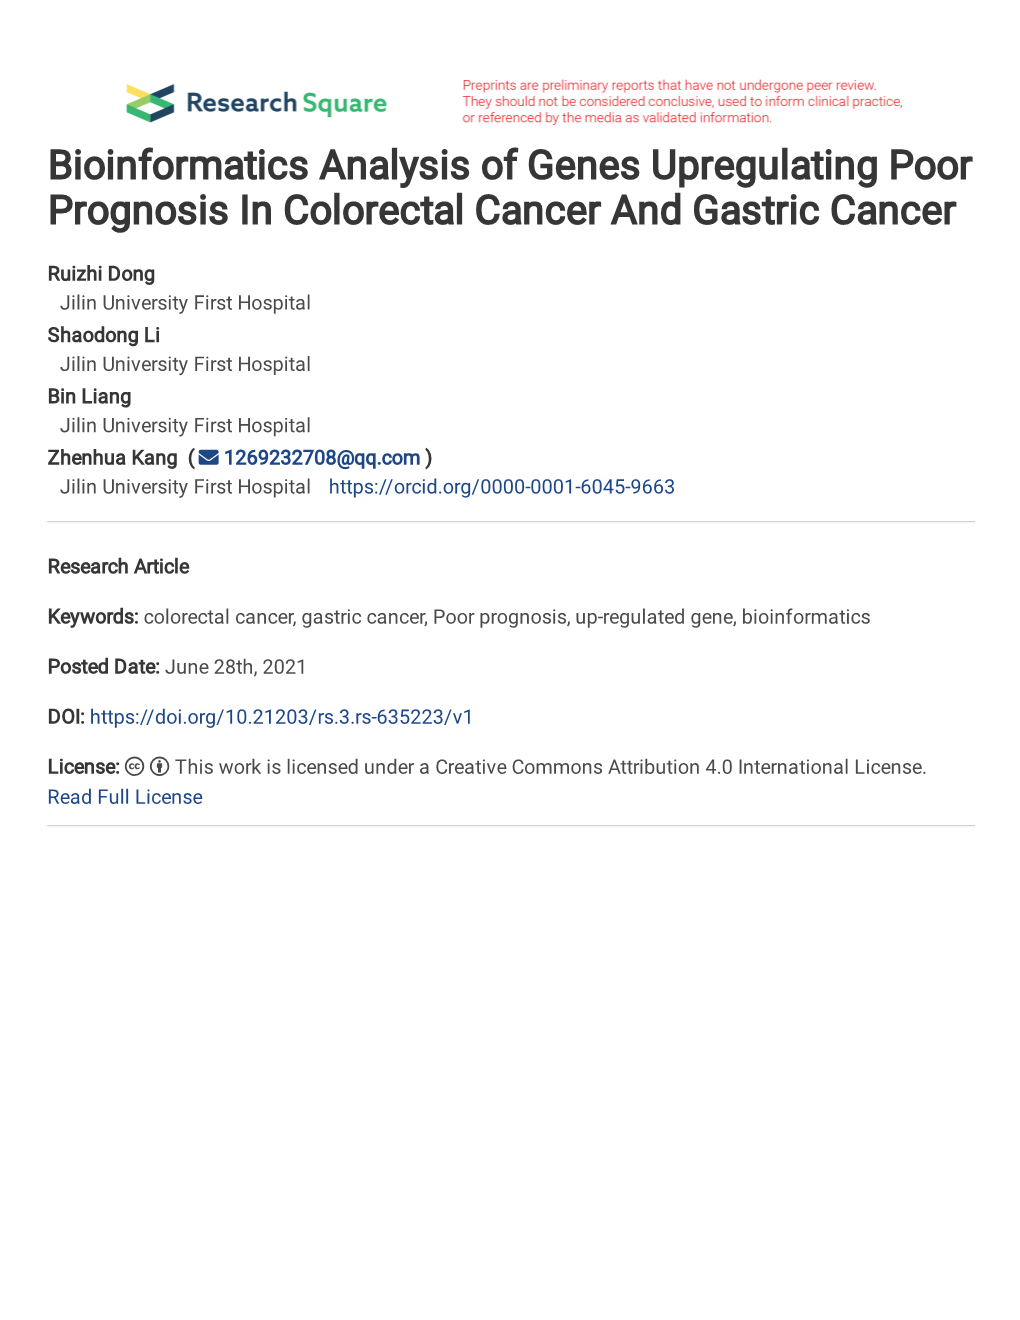 Bioinformatics Analysis of Genes Upregulating Poor Prognosis in Colorectal Cancer and Gastric Cancer